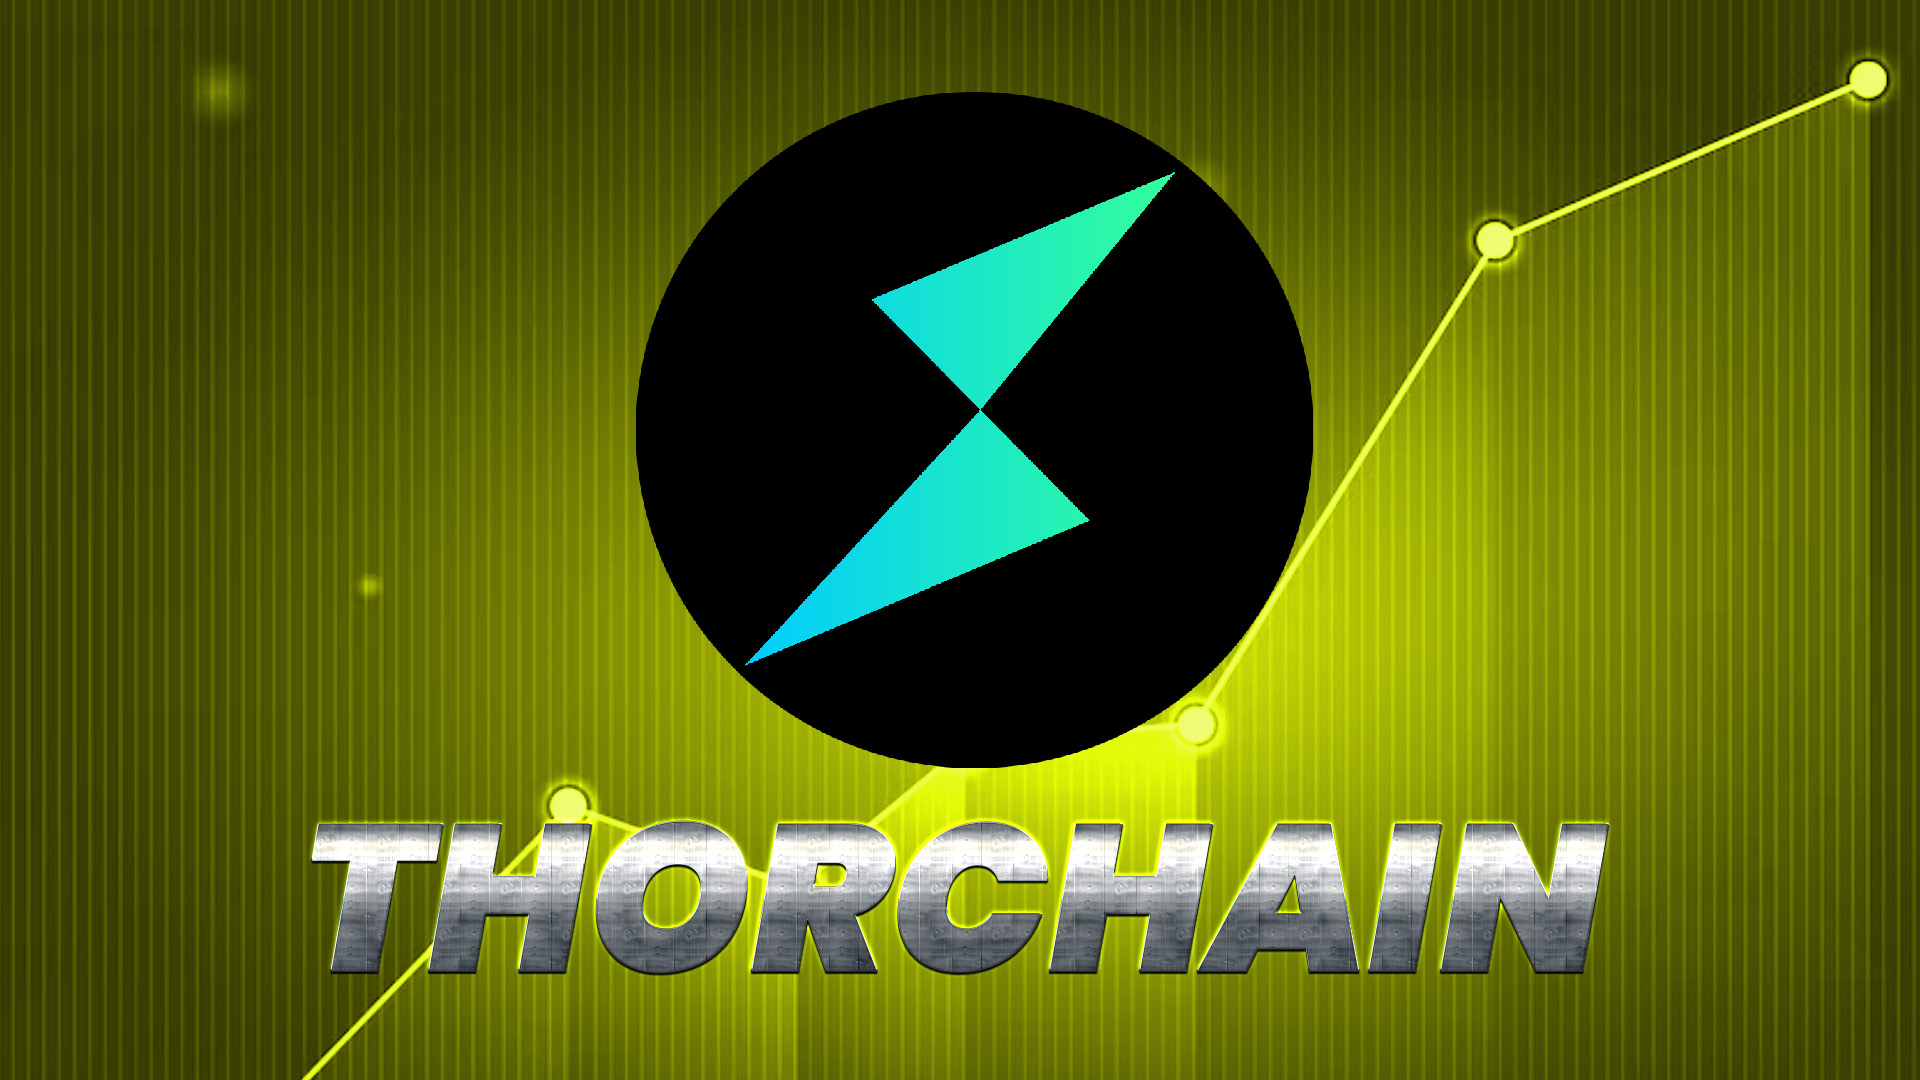 A Look at THORChain and How it Allows the Cross Chain Transfer.